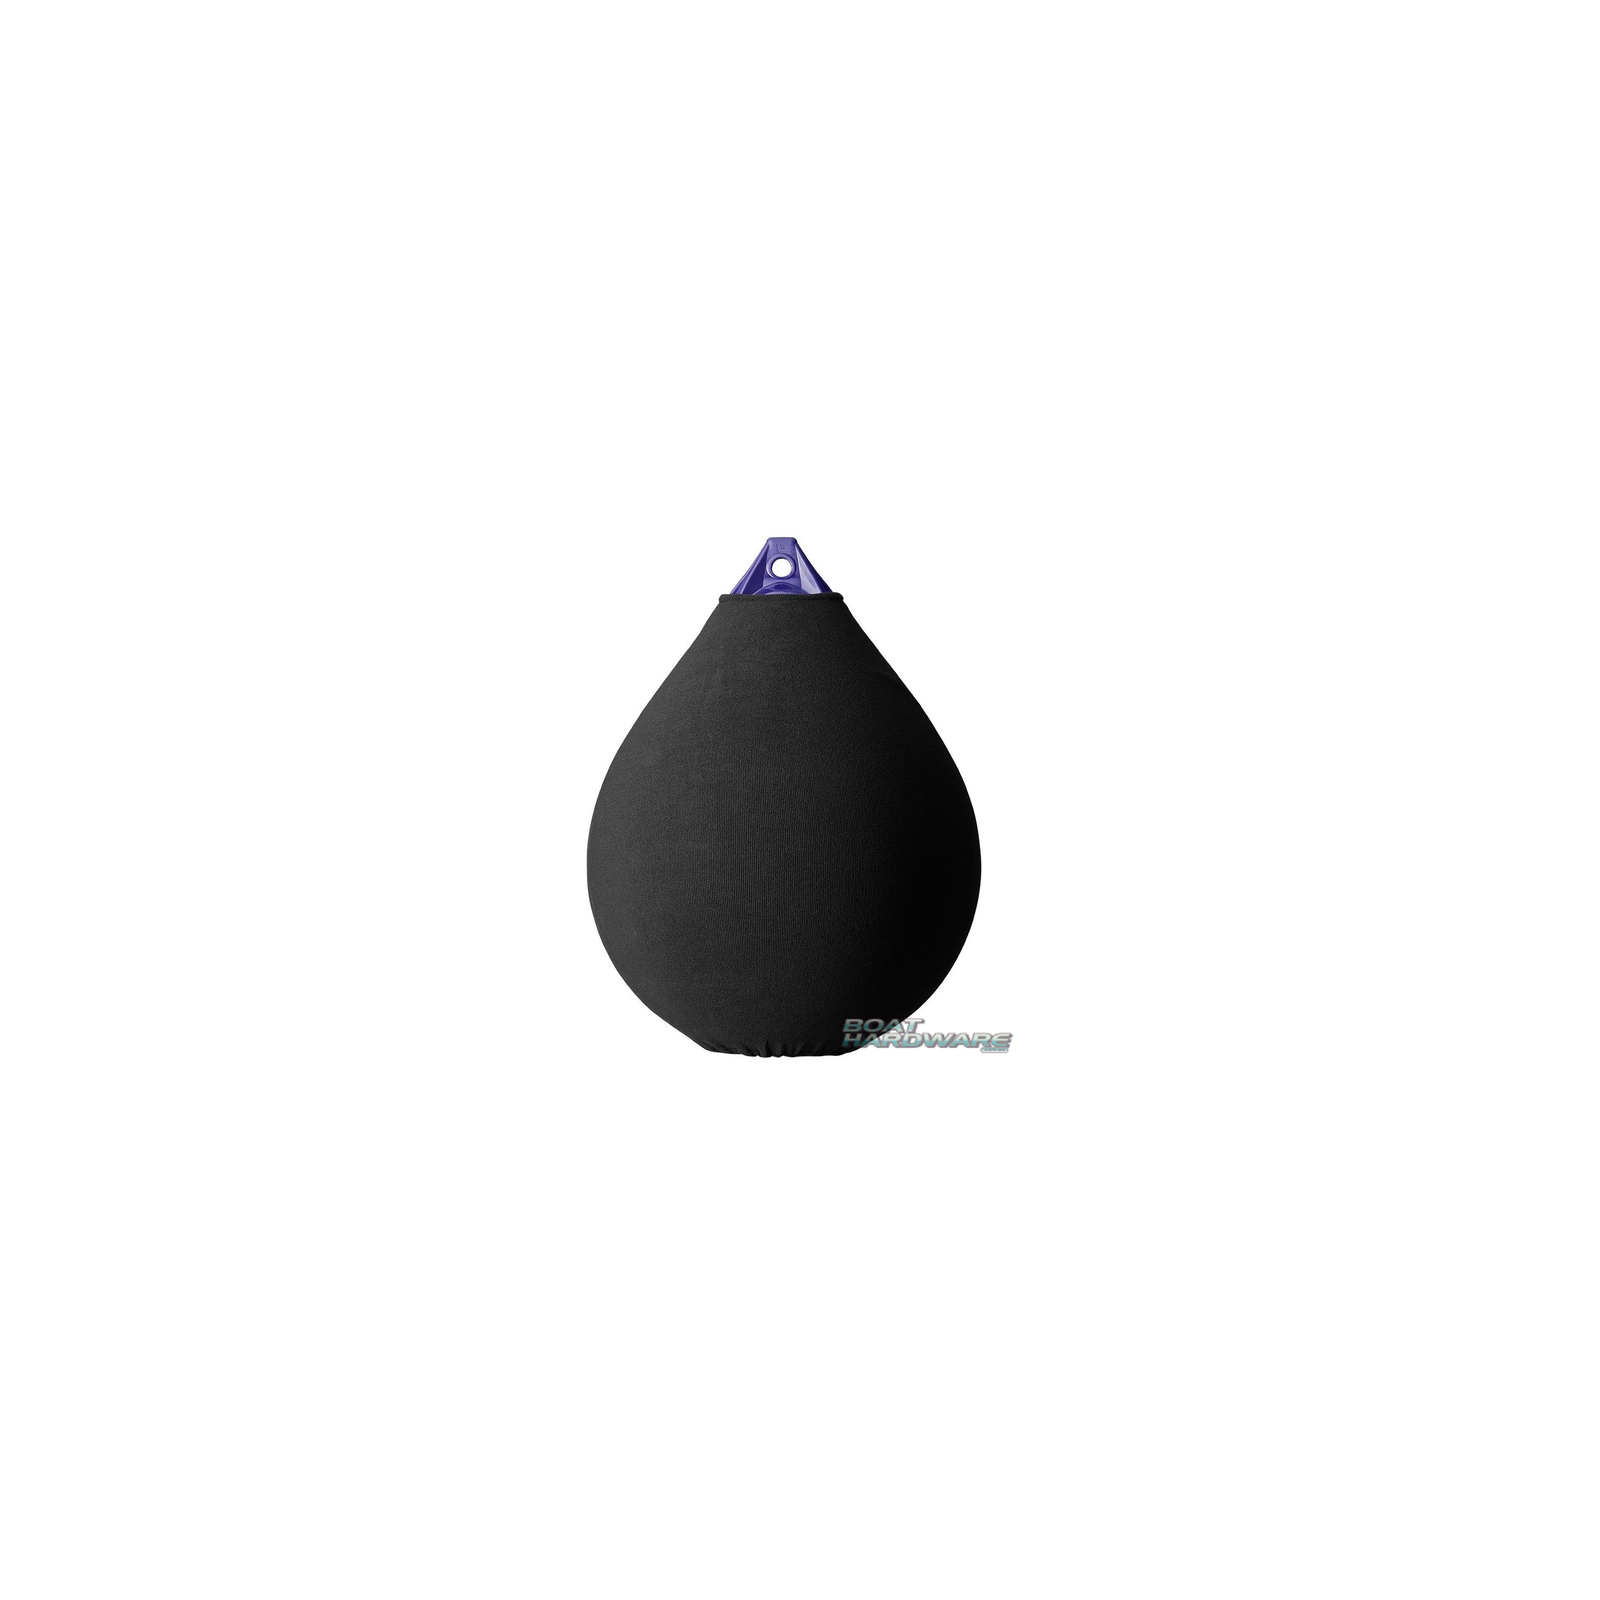 Fendress Teardrop Fender COVER 650x880 - Black Double Thickness